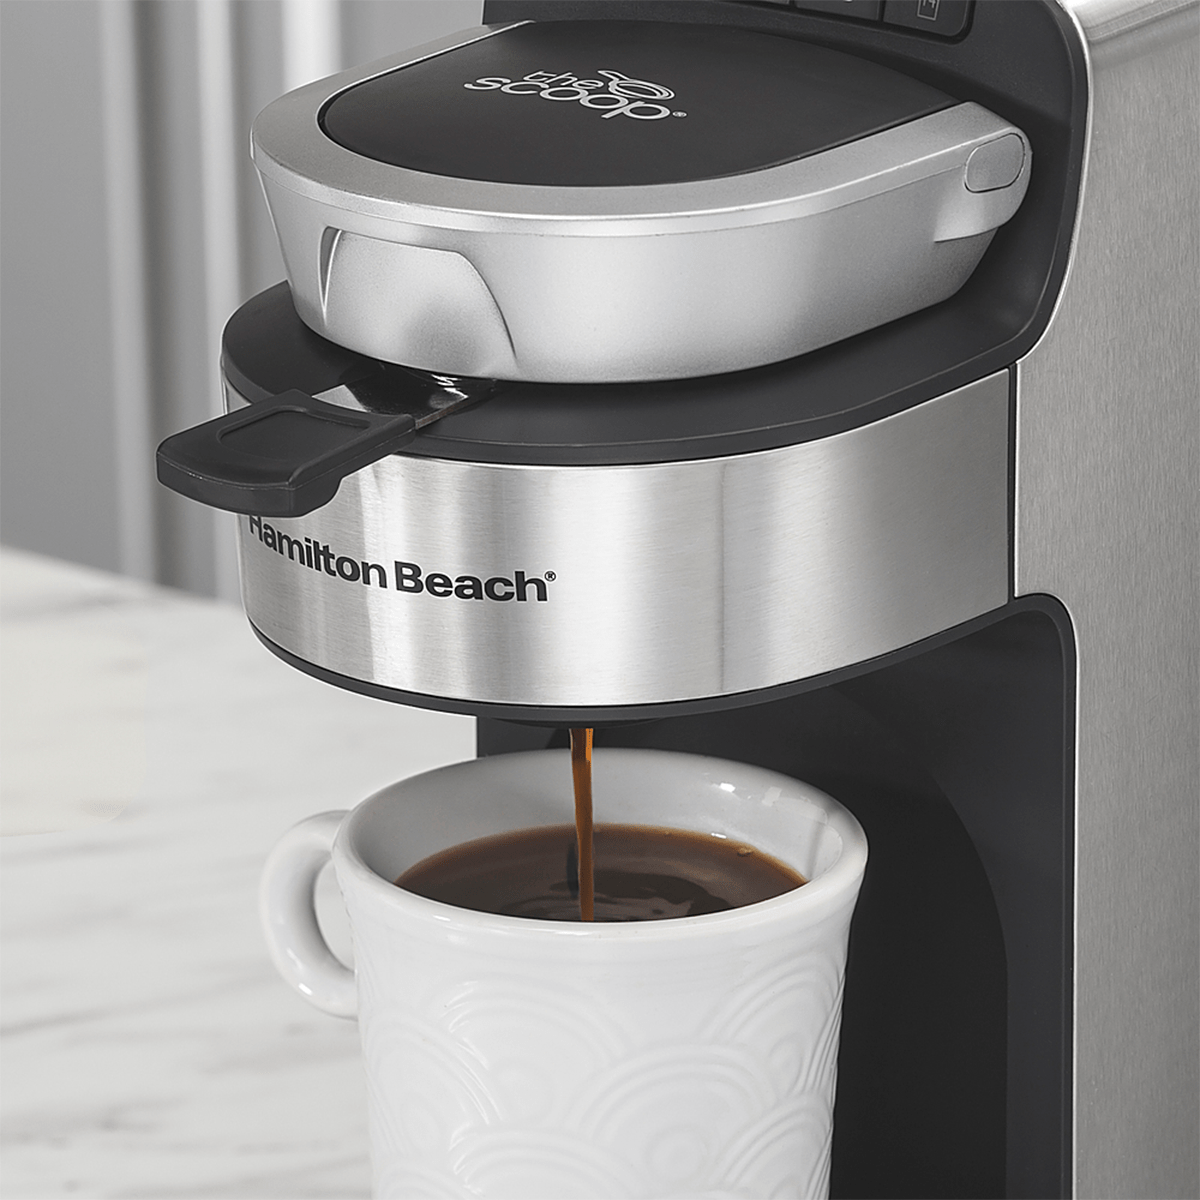 Make Your Perfect Cup of Coffee with the Scoop Single Serve Coffee